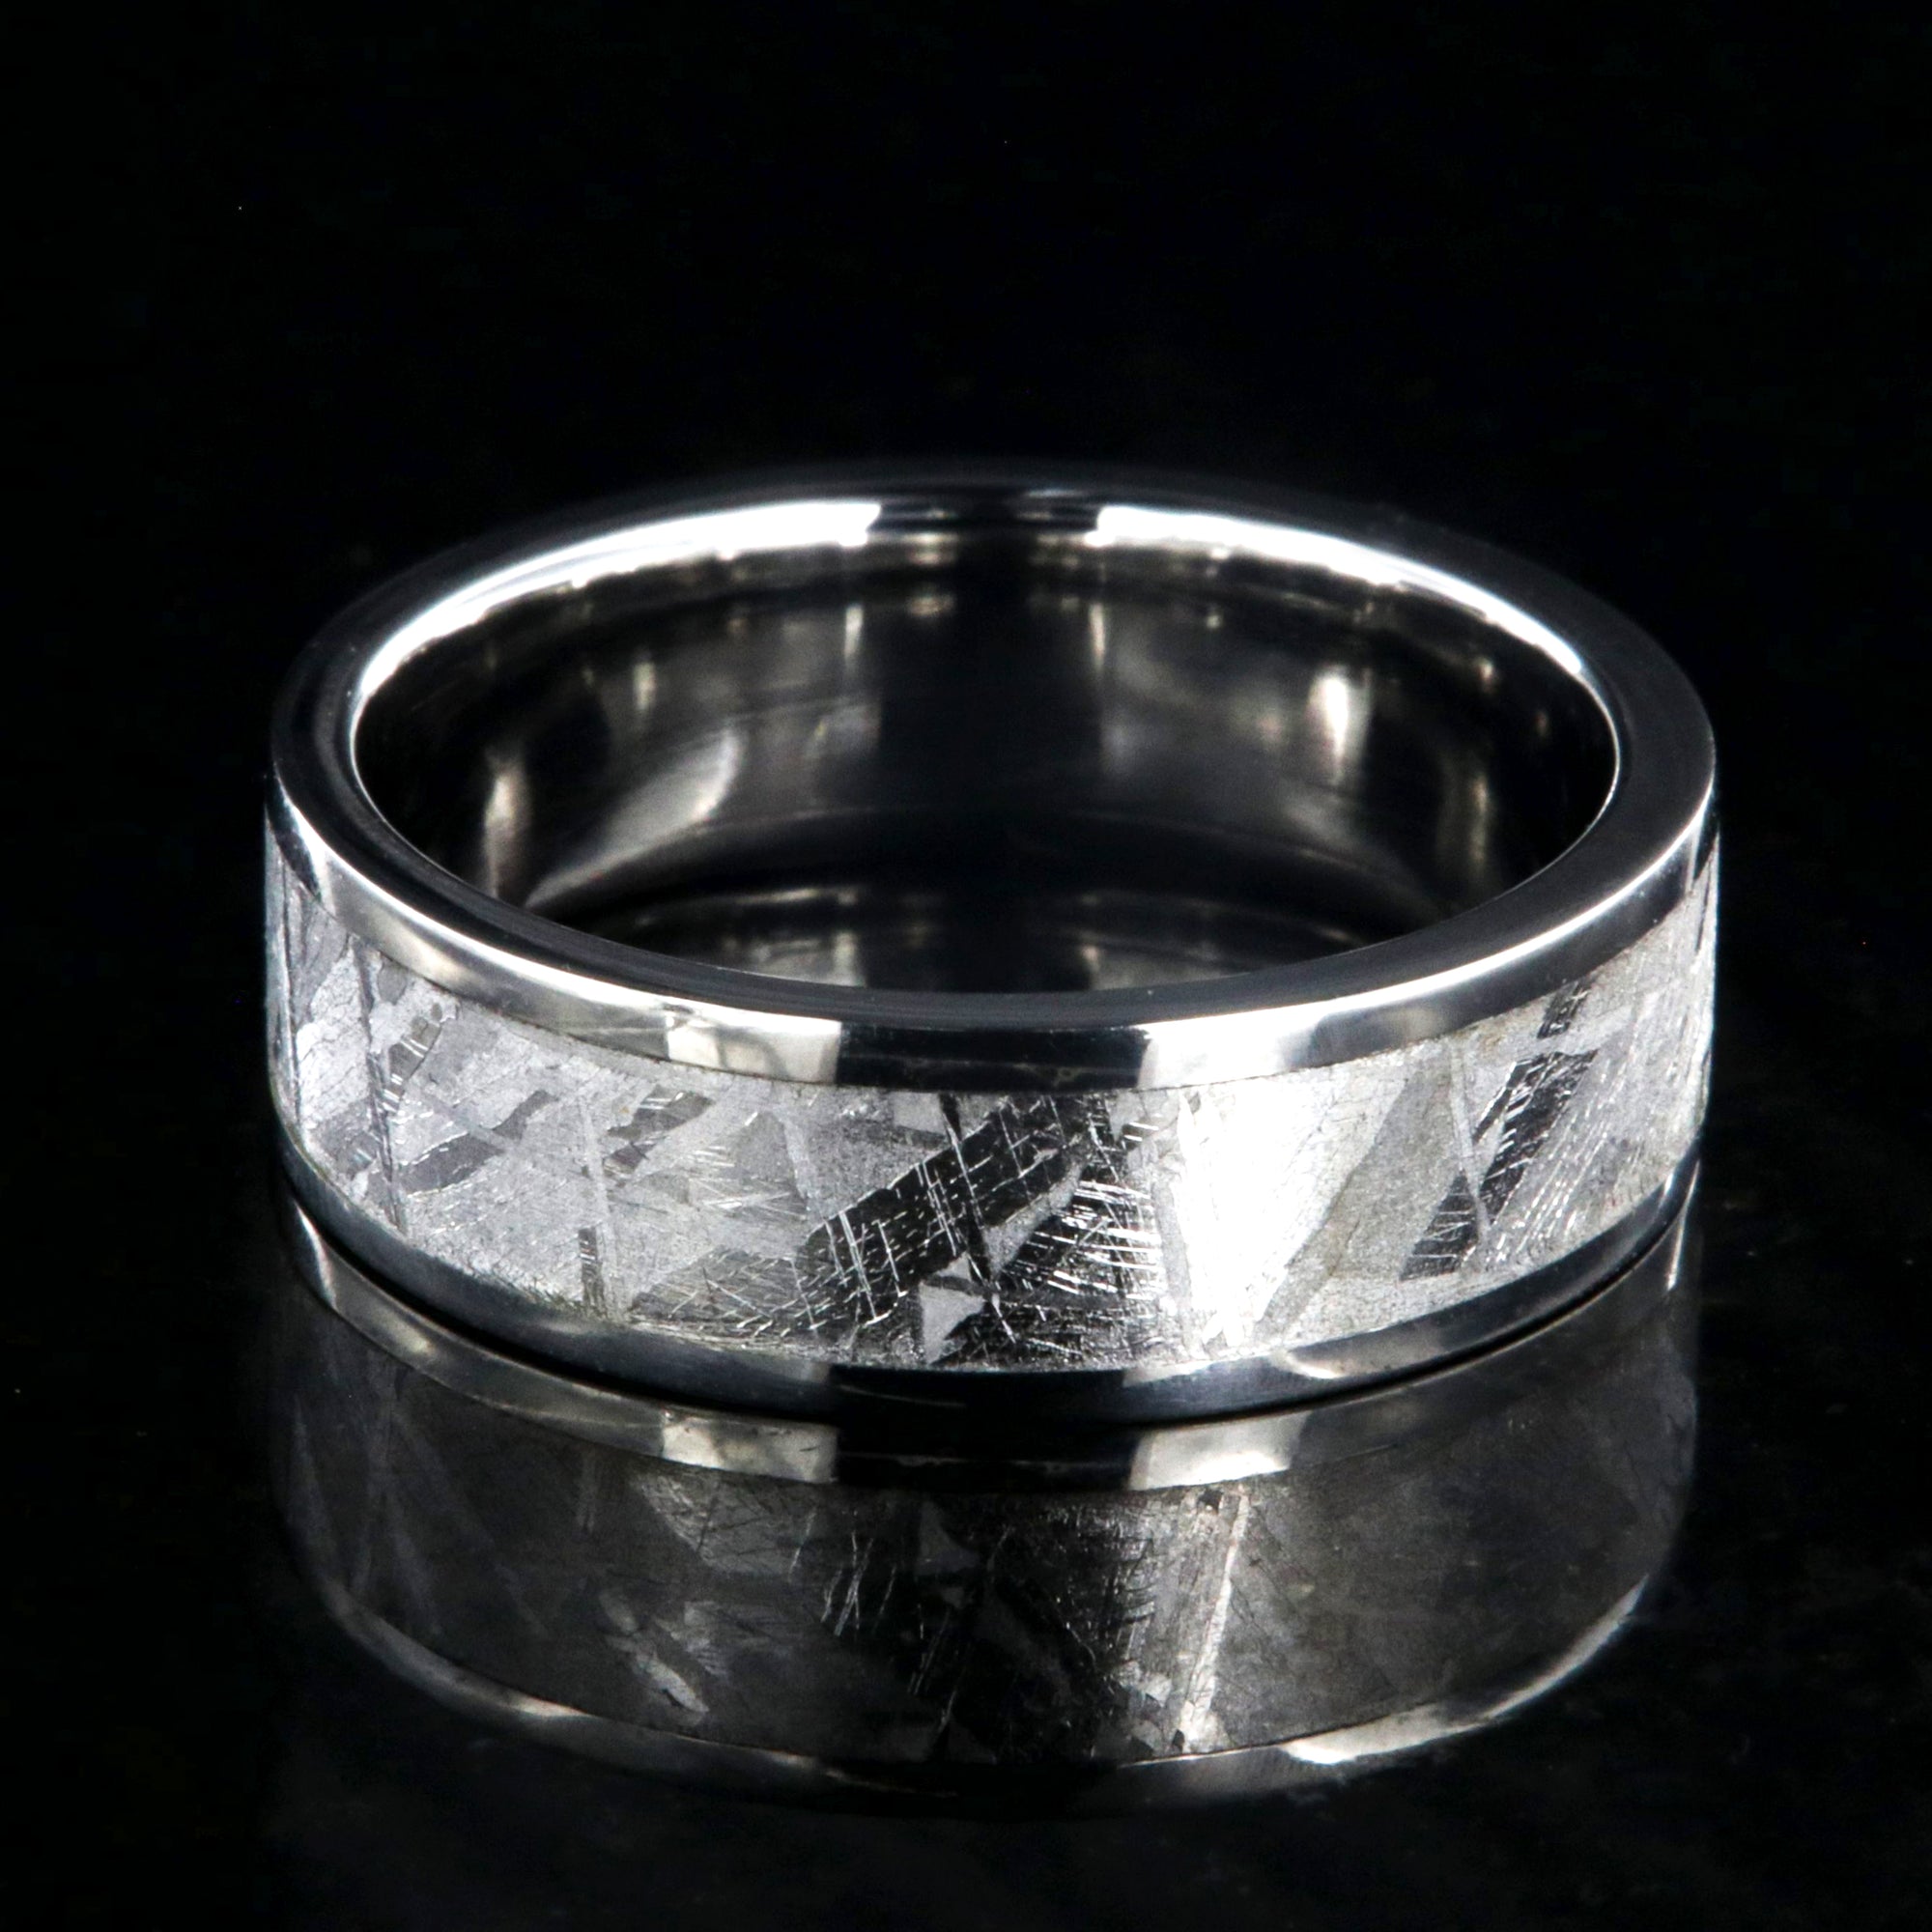 7mm wide flat profile Gibeon meteorite ring with cobalt sleeve and edges